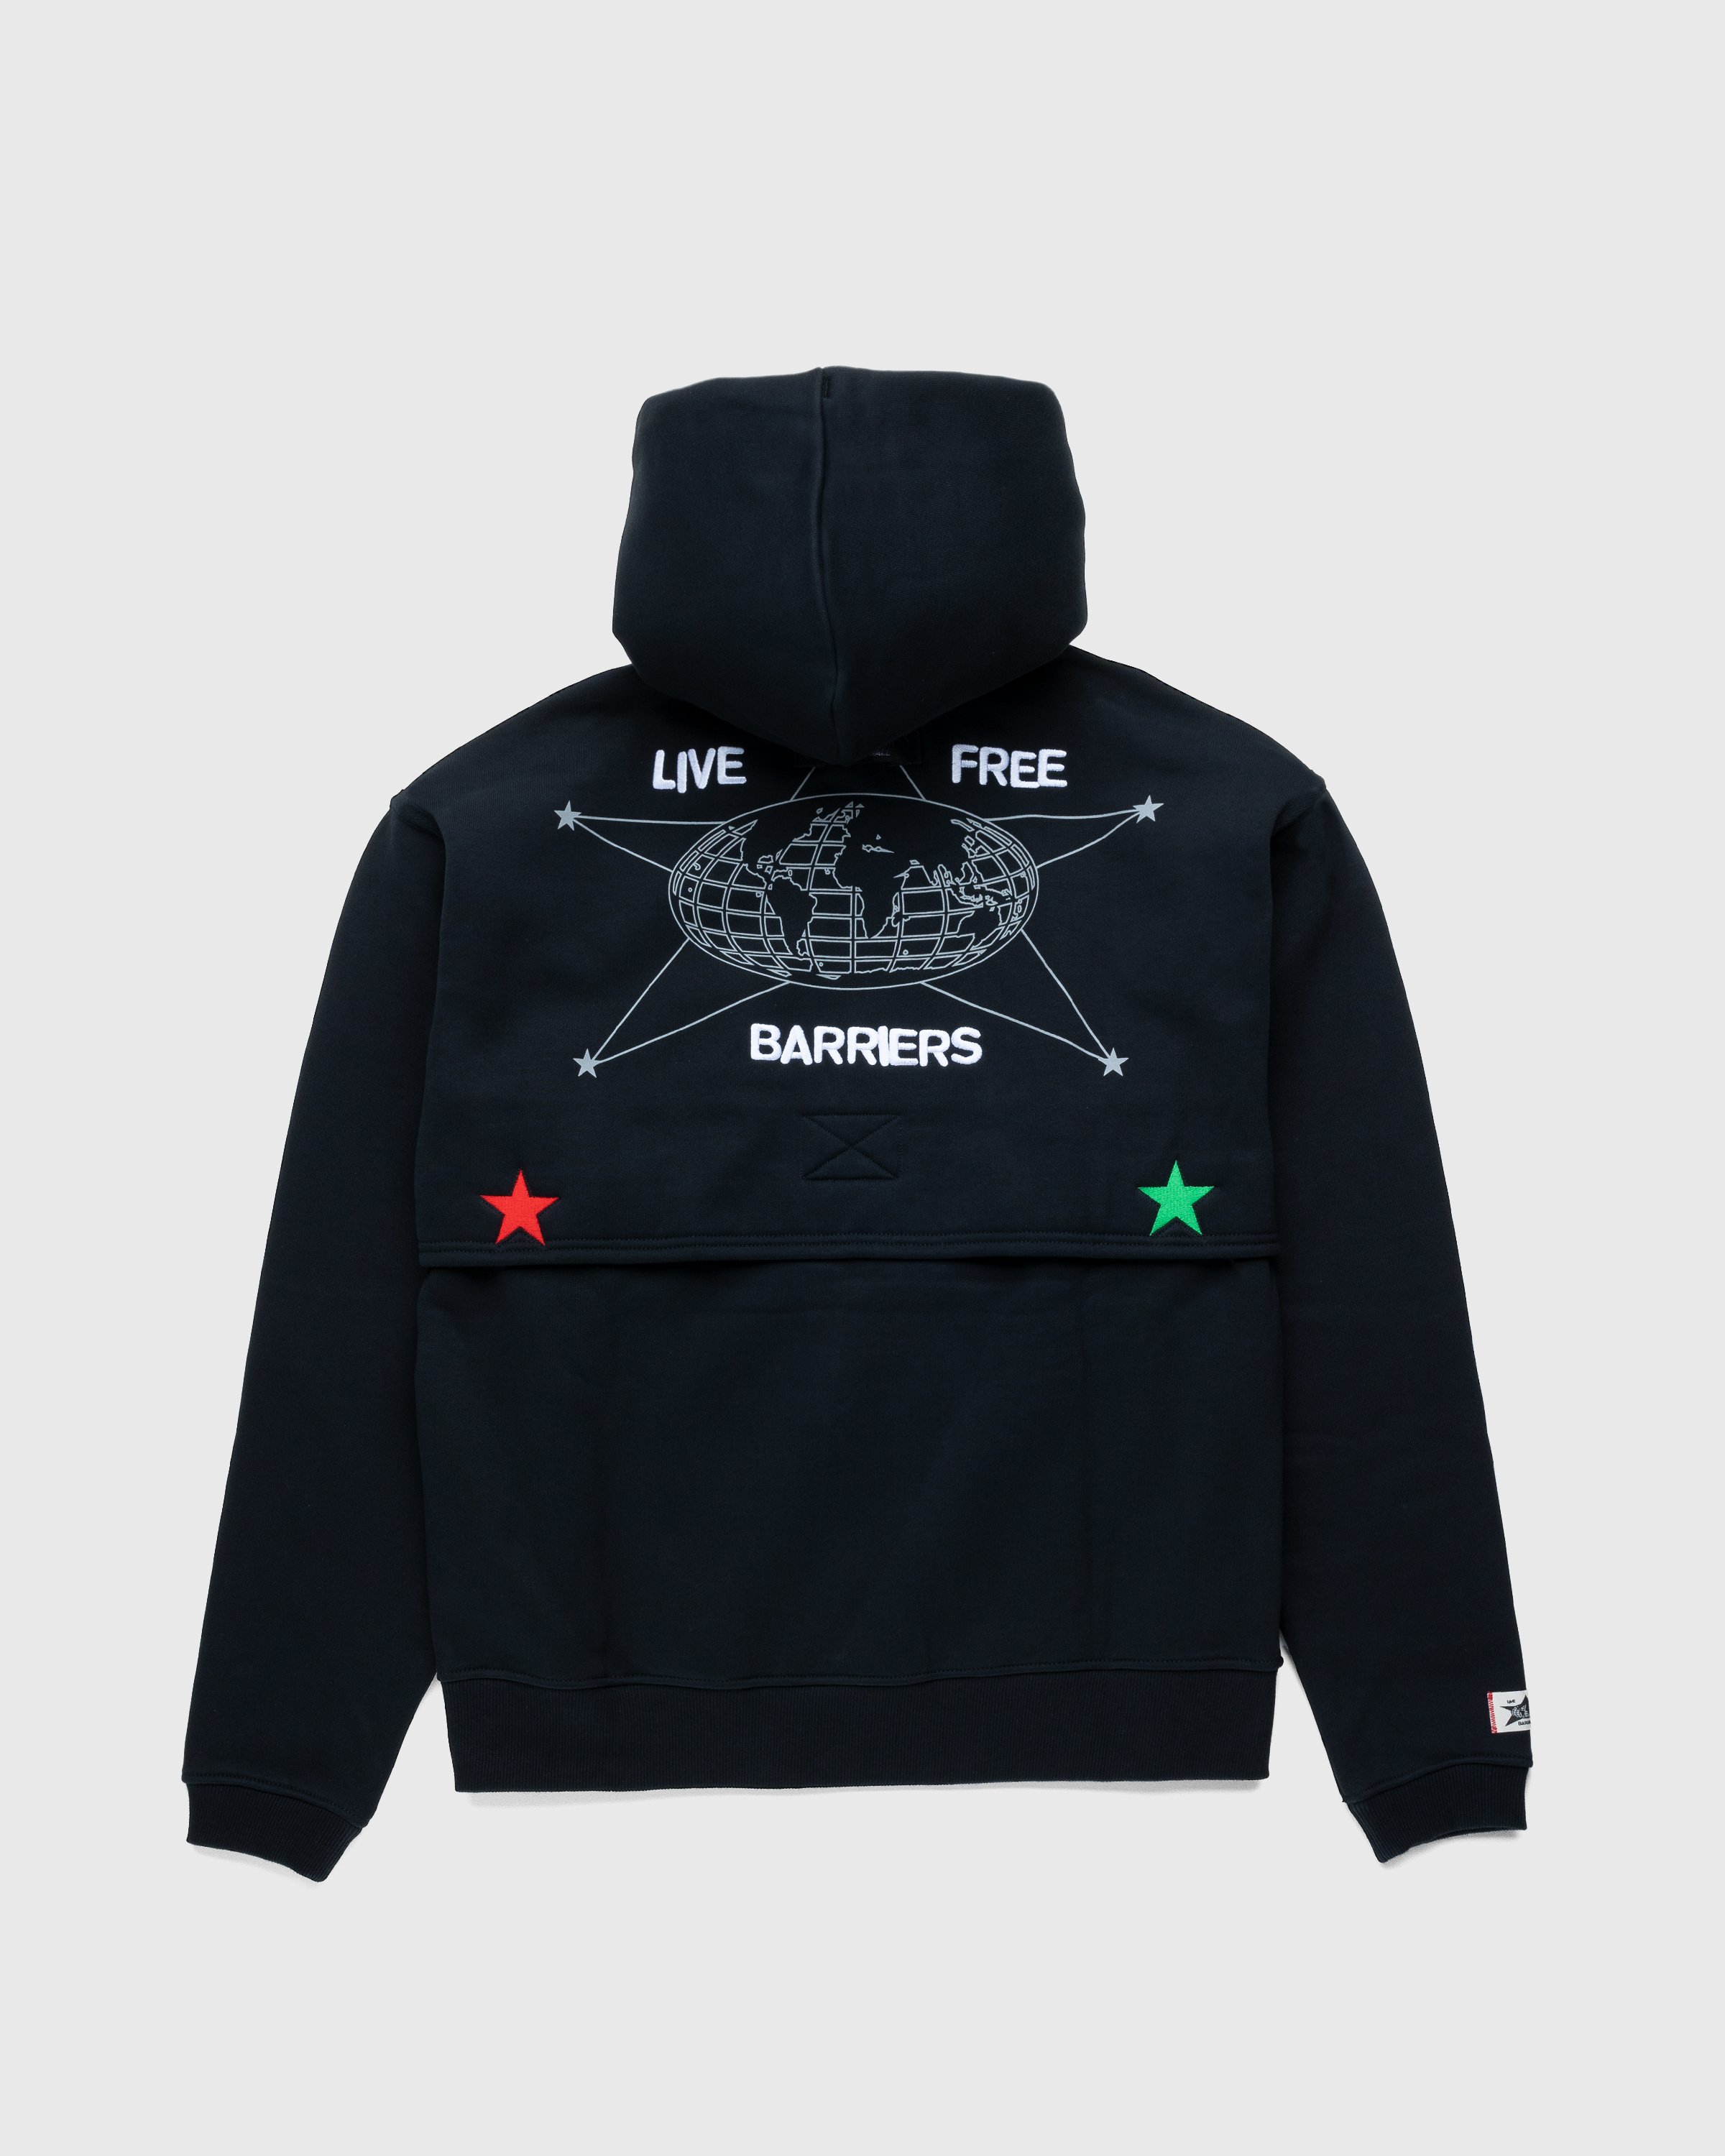 Converse x Barriers - Court Ready Hoodie Black - Clothing - Black - Image 1